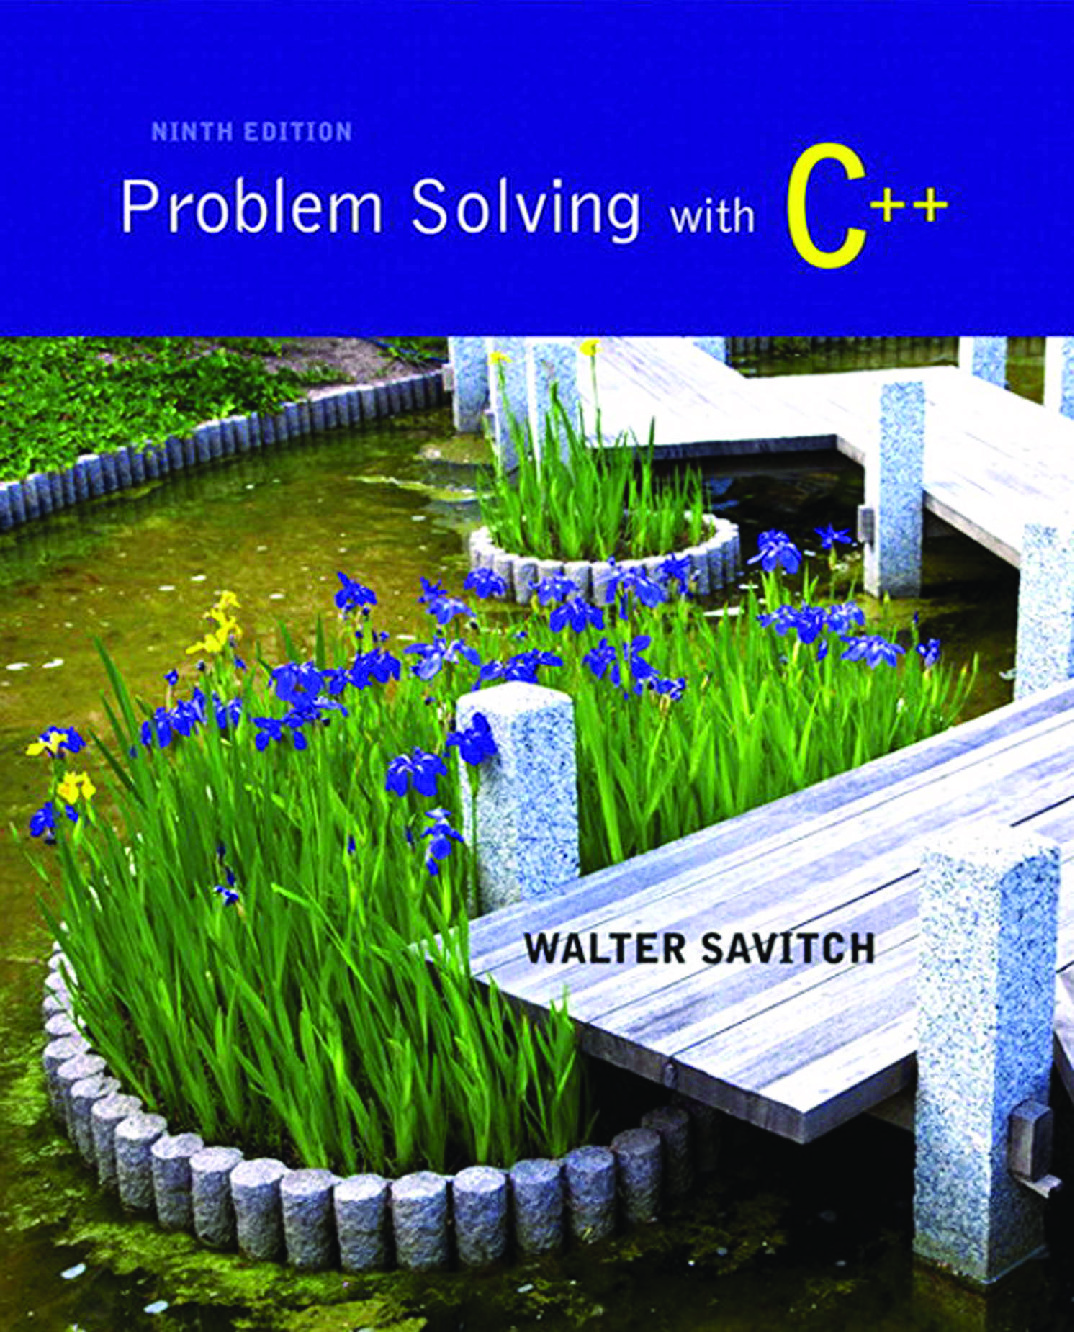 Problem Solving with C++ – Walter Savitch 9th Edition